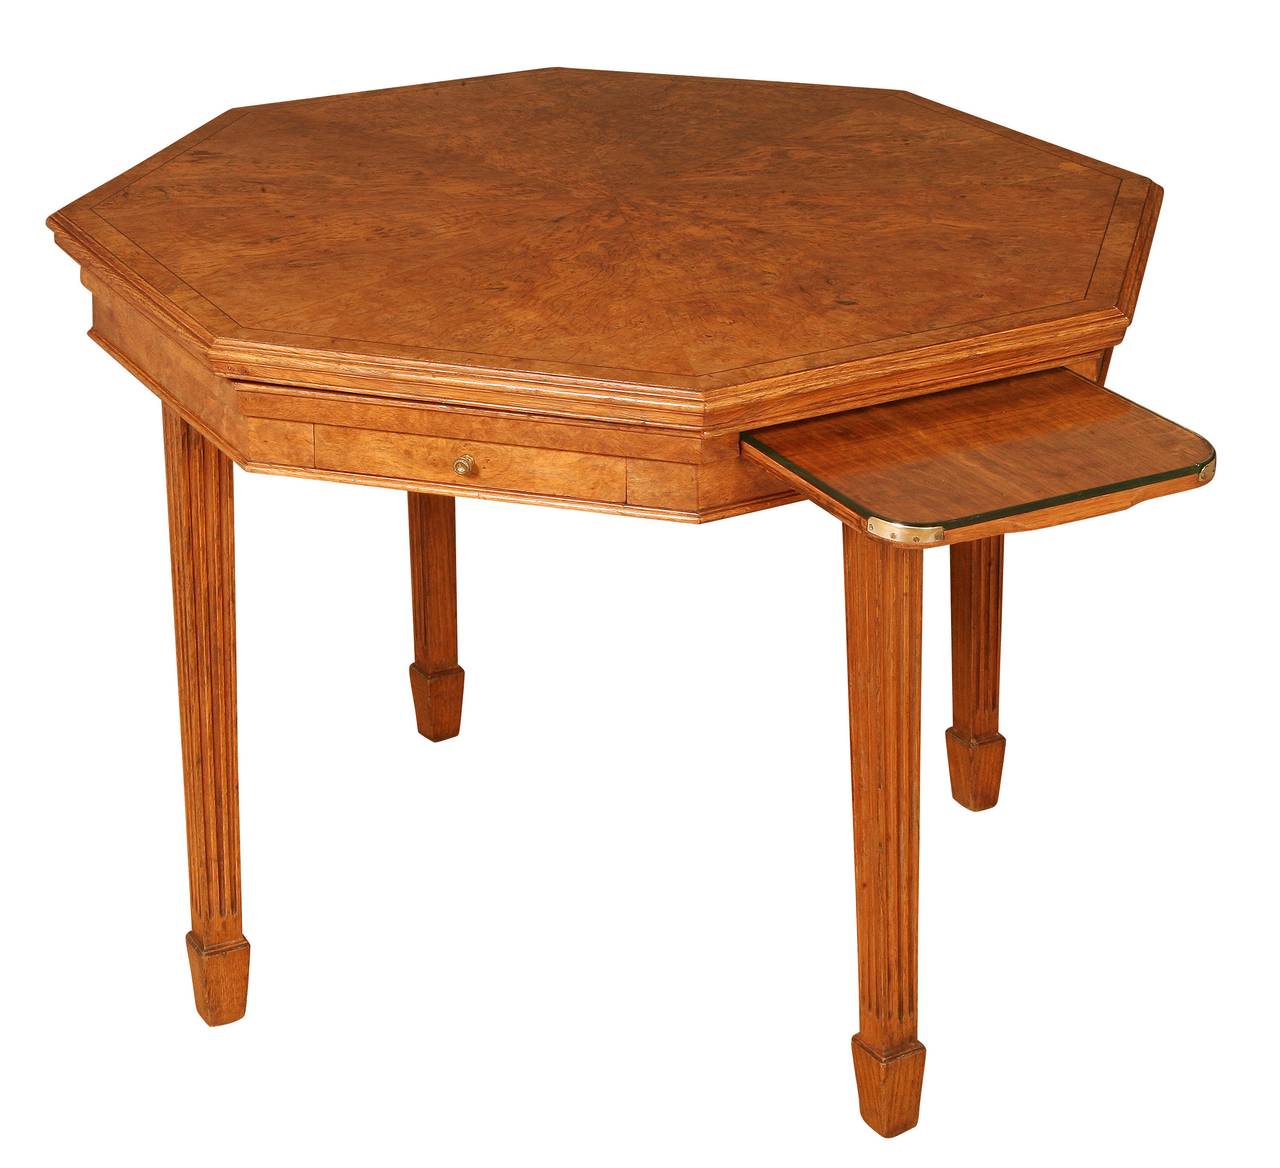 When the pollard oak cover of this centre table is removed, the blue baize top and its secondary use as a games table is revealed. It is stamped to the underside and the tops of the 2 drawers with the maker’s name of Trollope & Colls, along with